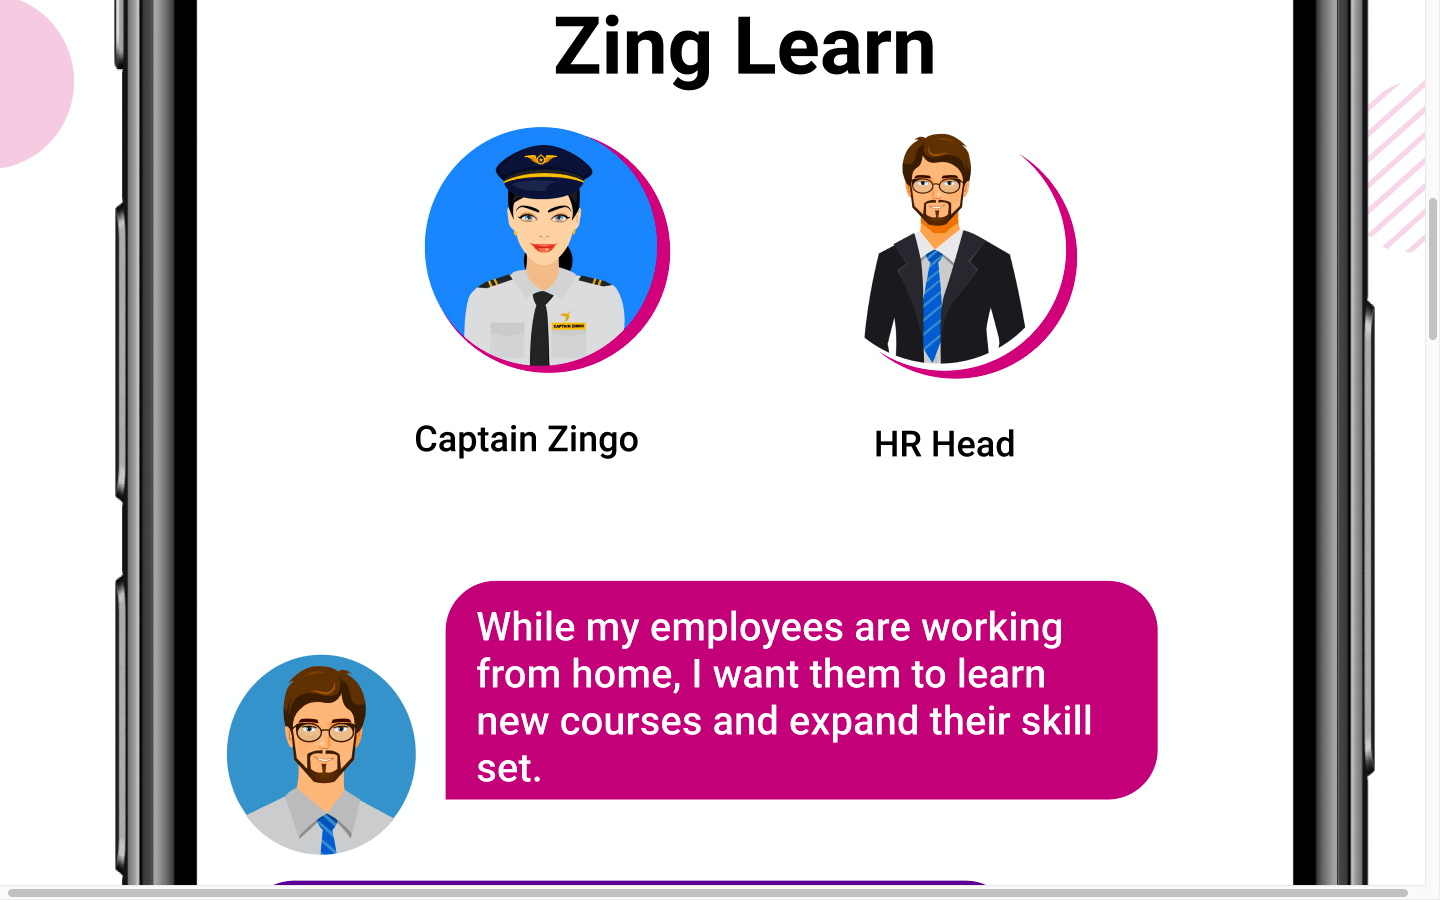 Elevate your Employee Experience and Loyalty with Zing Learn